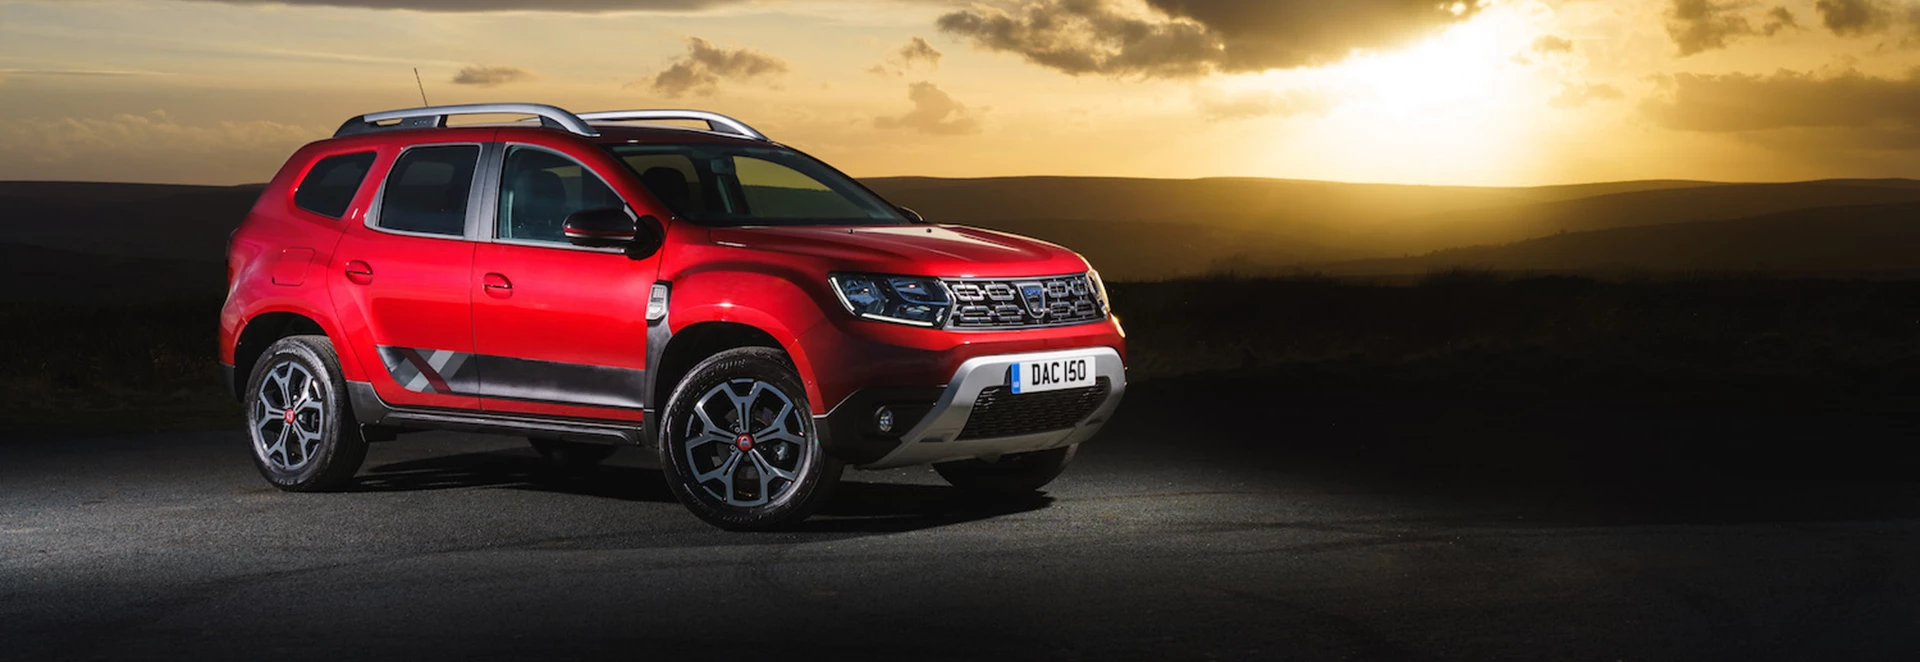 Dacia adds Techroad special editions to range